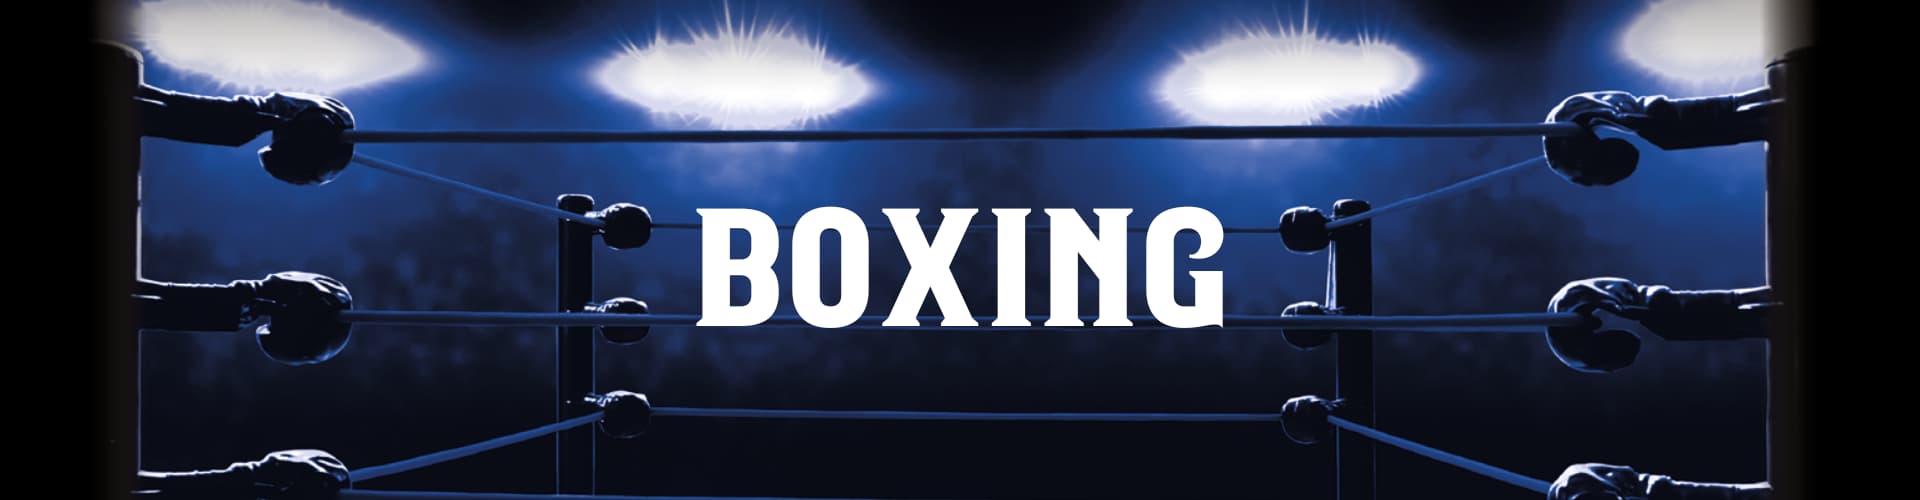 Watch Live Boxing in Birmingham at The Tennis Court Pub